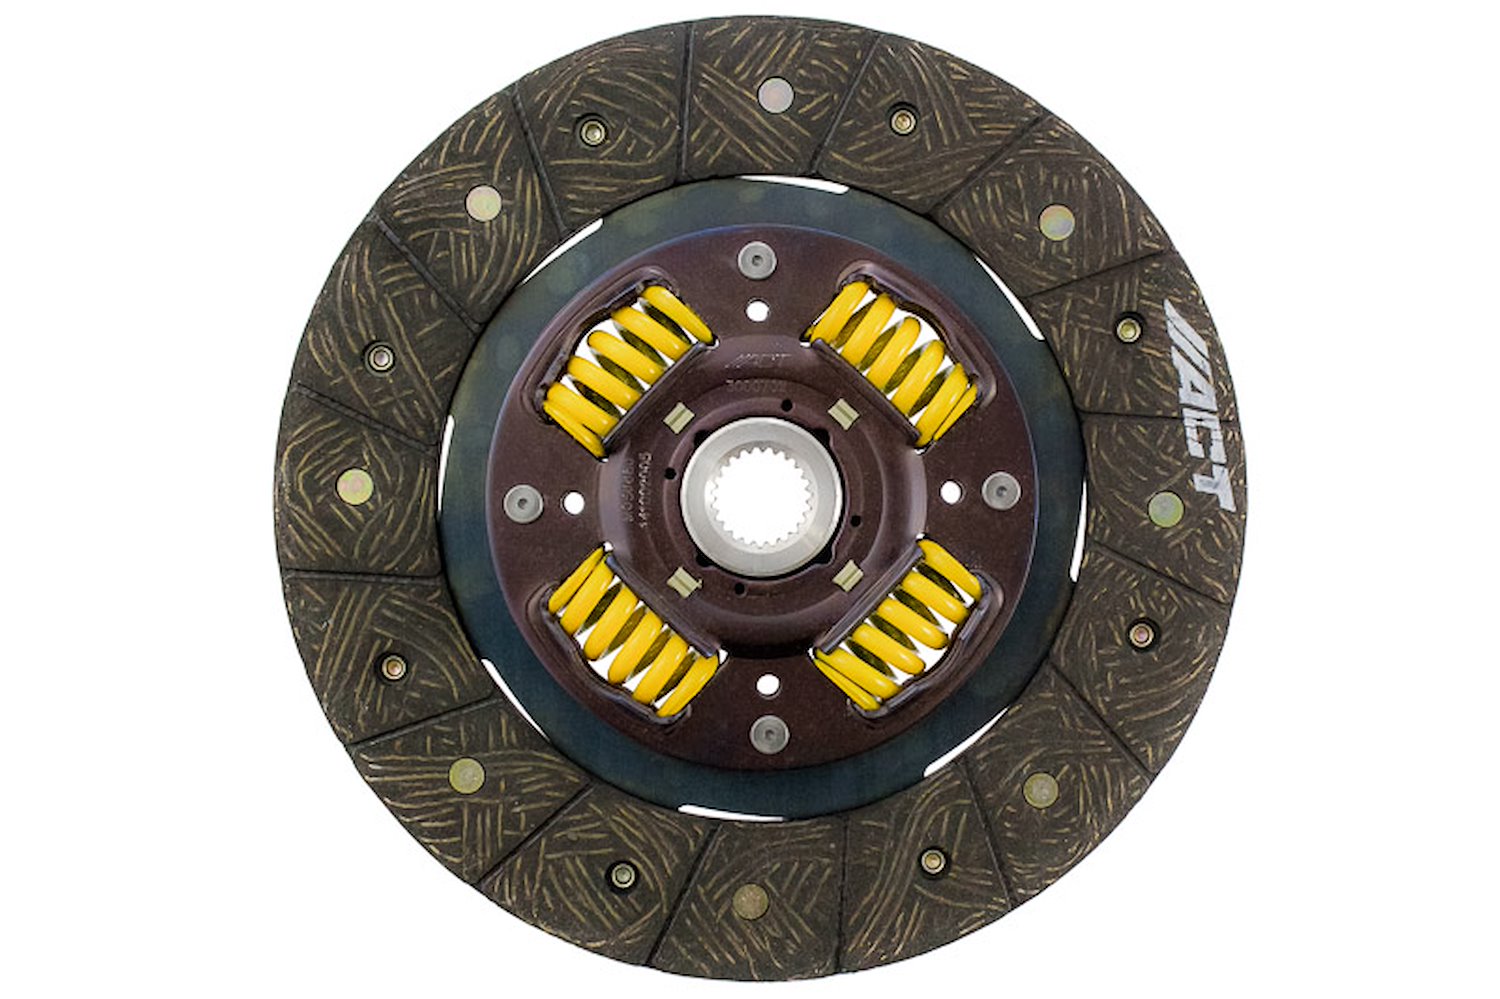 Performance Street Sprung Disc Transmission Clutch Friction Plate Fits Select Audi/Volkswagen